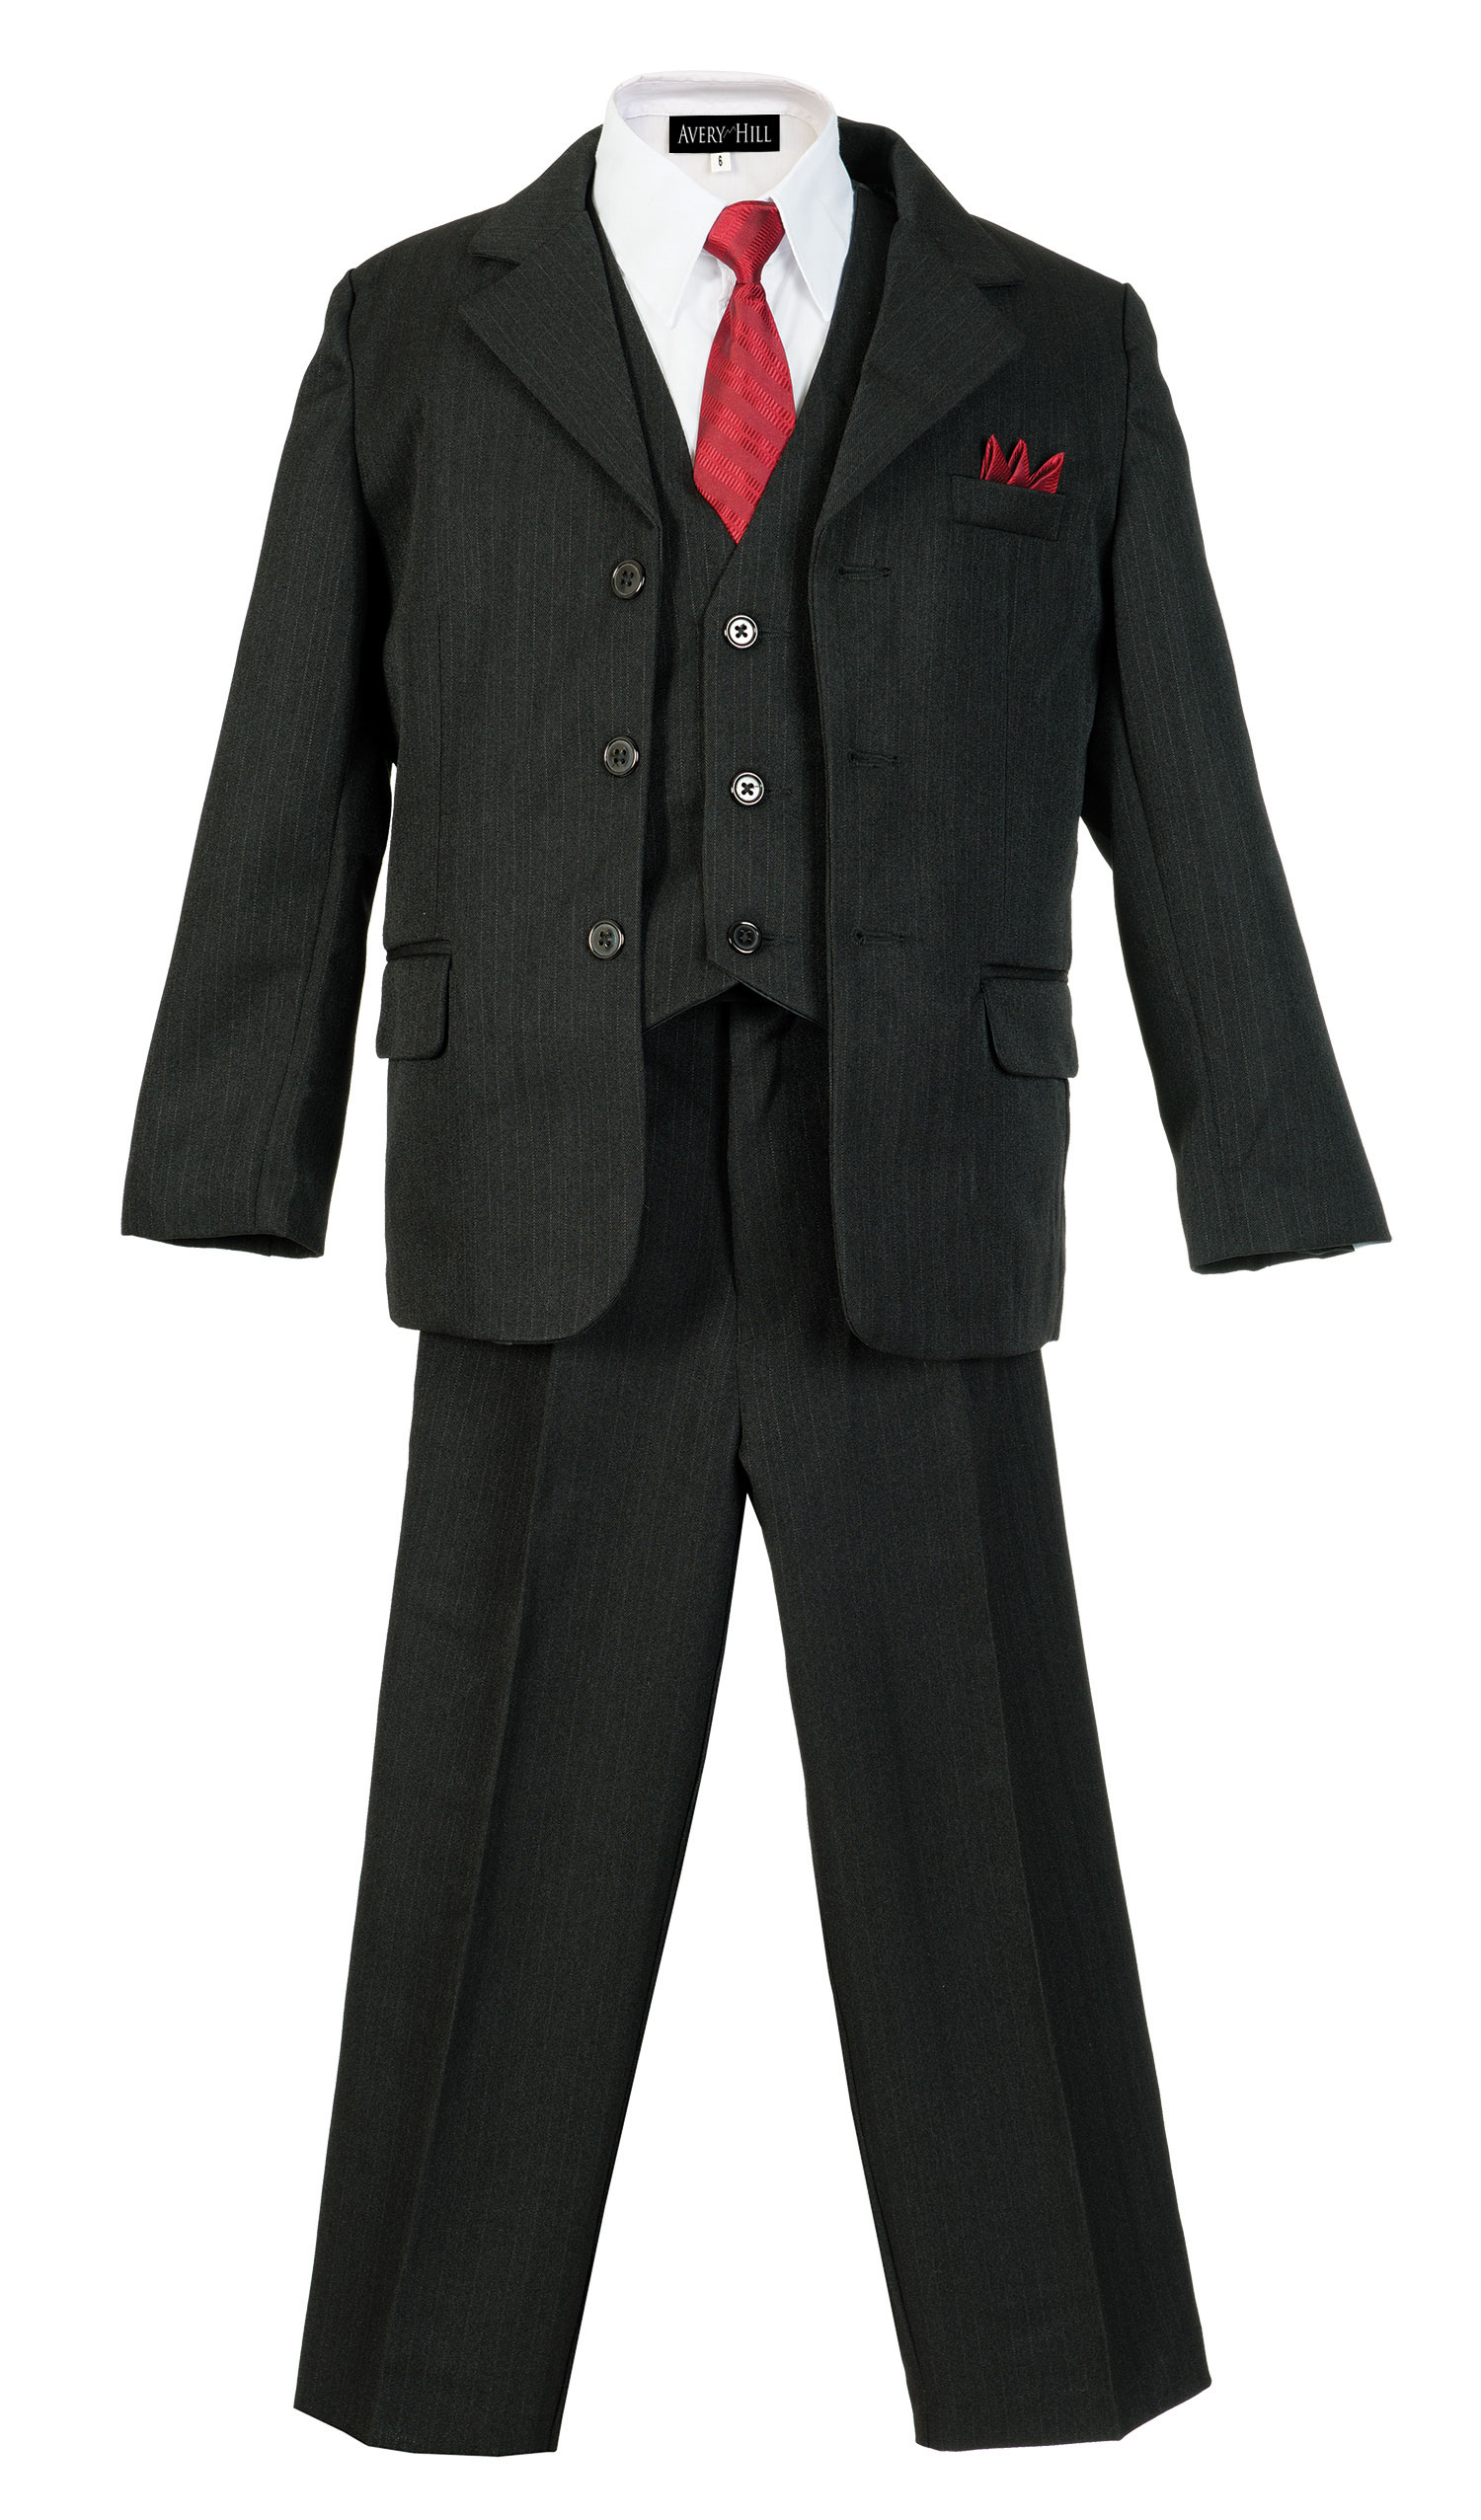 Boys Pinstripe Suit Set with Matching Tie BK 7